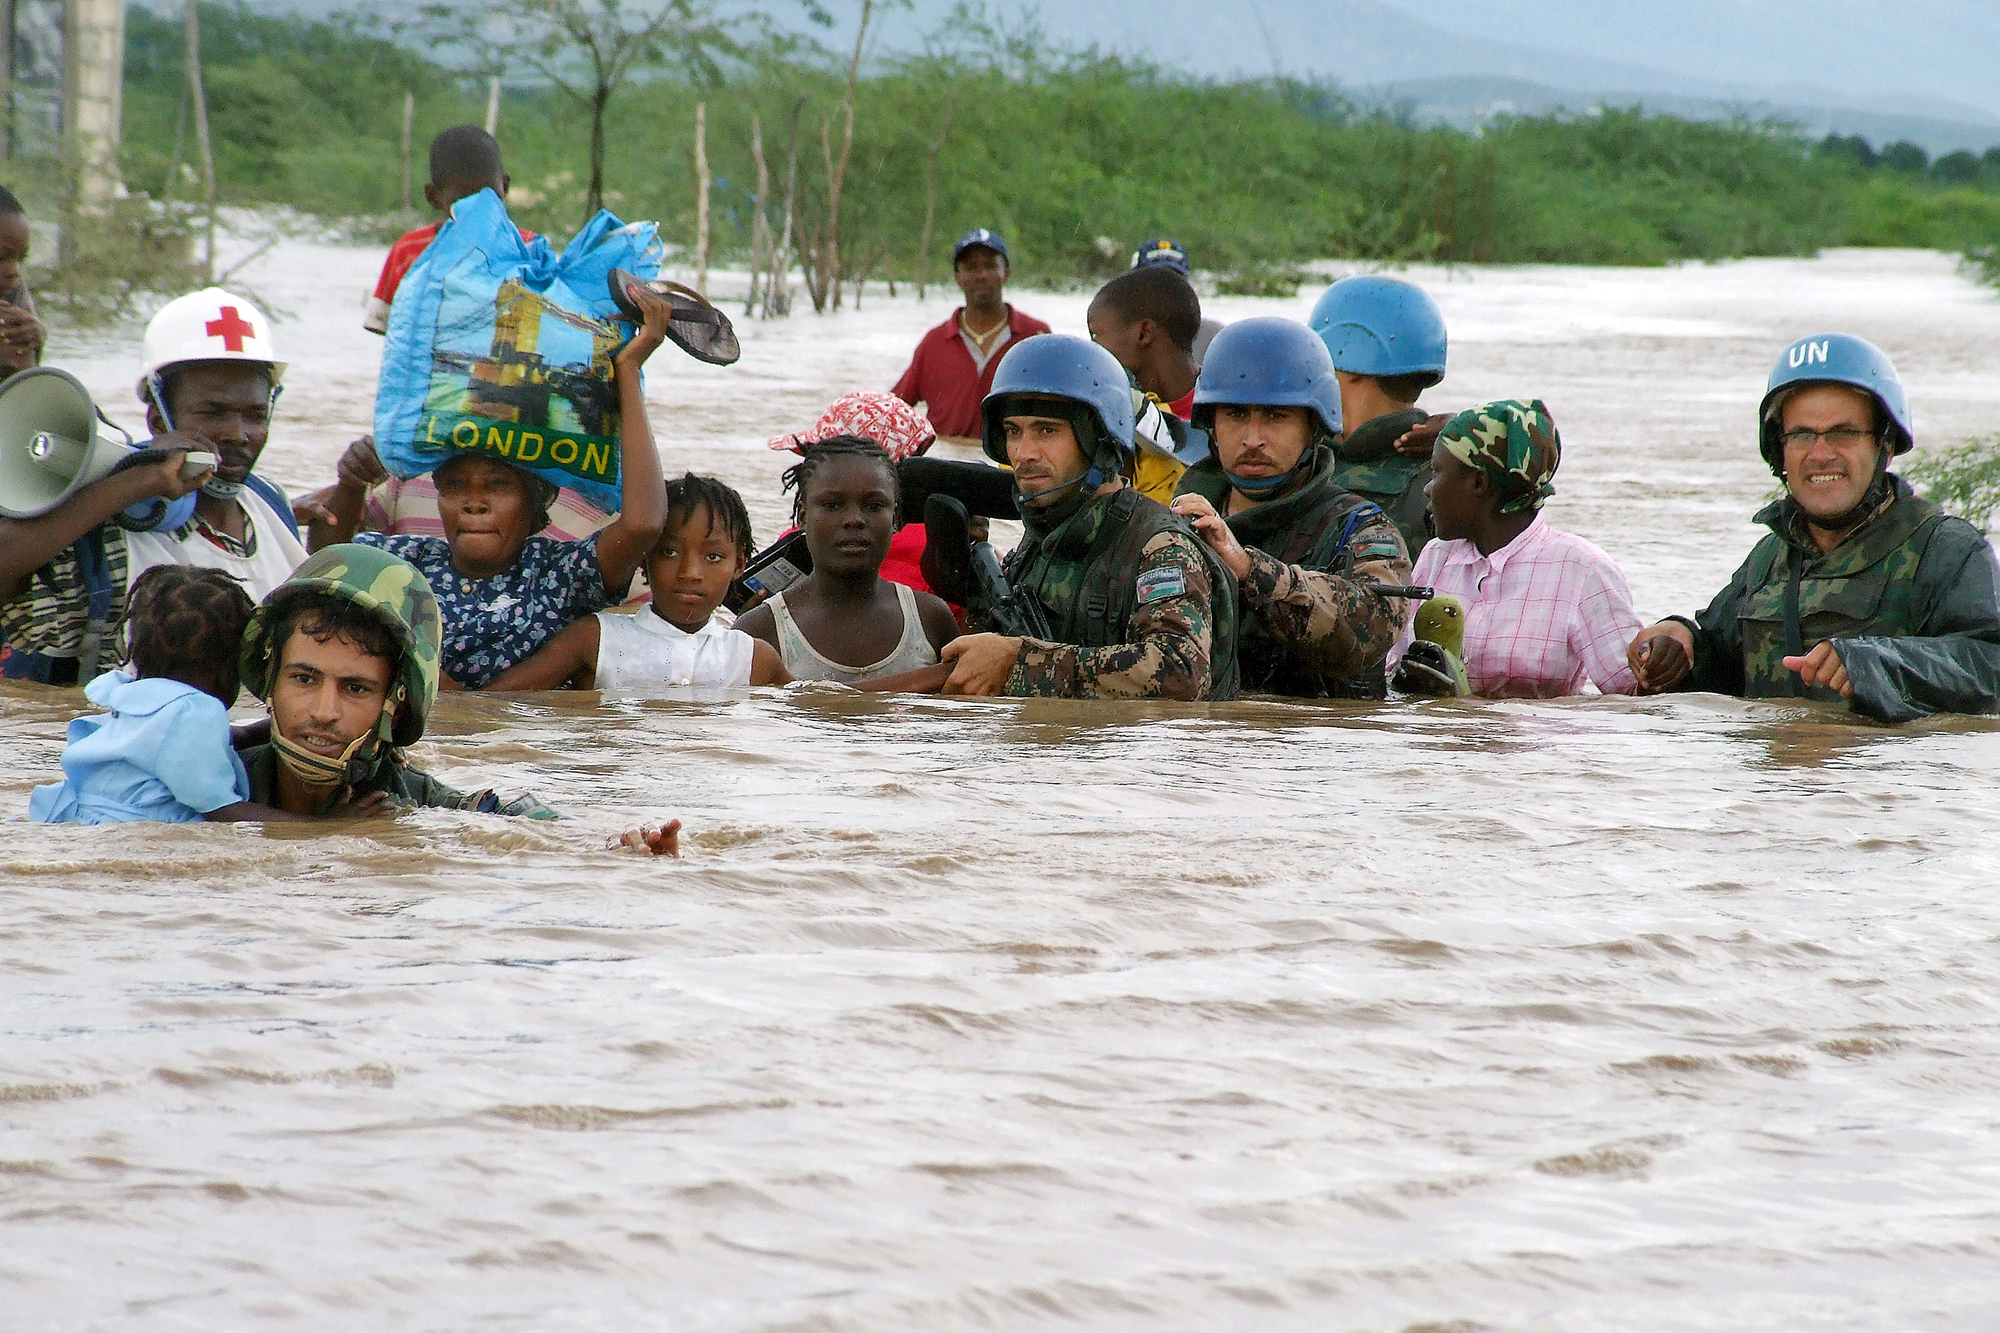 Members of the Jordanian battalion of the United Nations Stabilization Mission in Haiti (MINUSTAH) rescue children from an orphanage destroyed by hurricane "Ike".